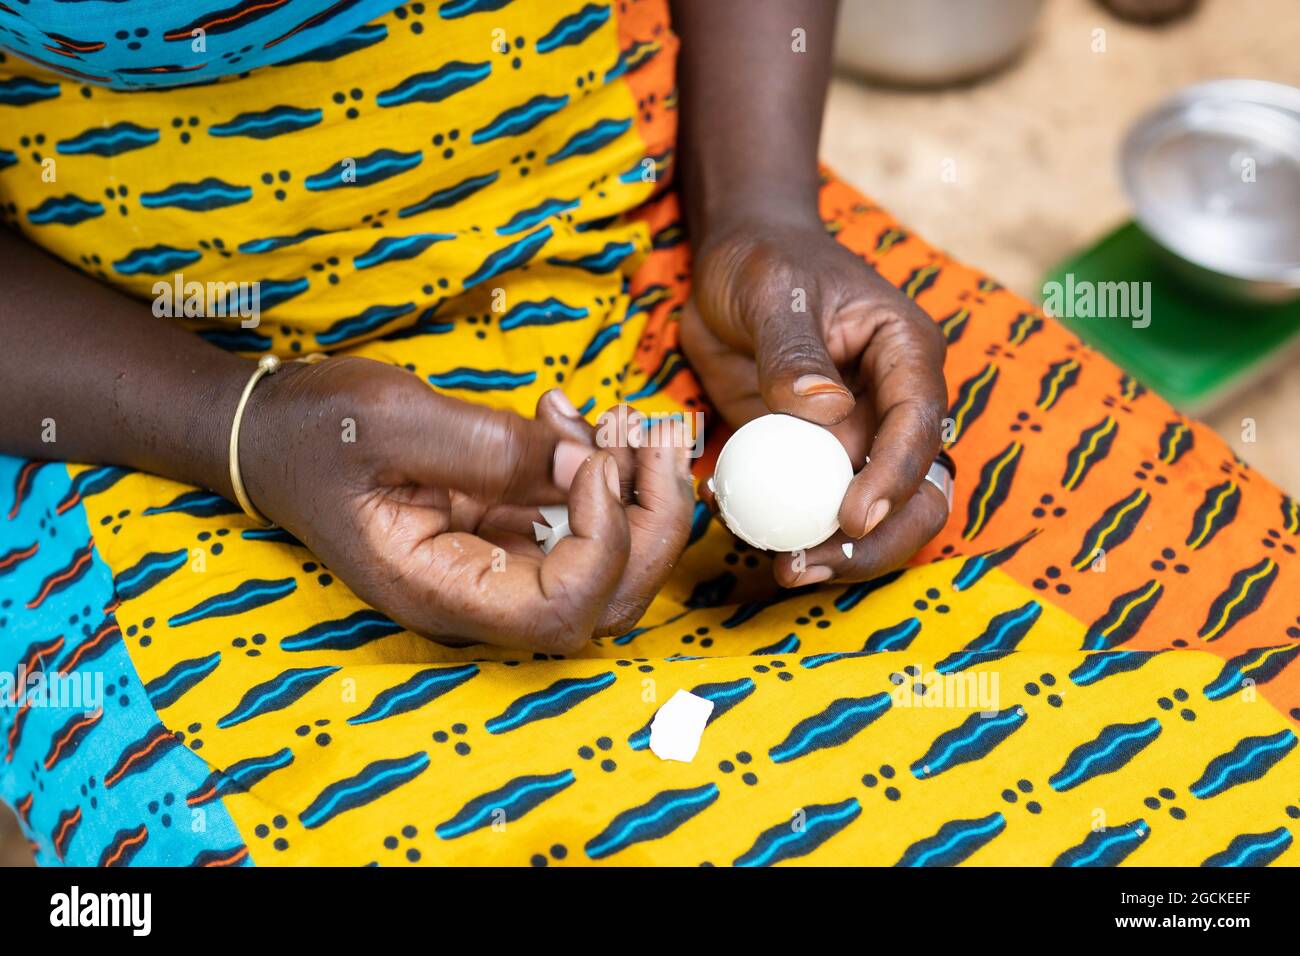 In this cloeup, a black woman or girl is peeling a boiled white egg,  letting the eggshells fall on the colouful fabric covering her lap Stock  Photo - Alamy